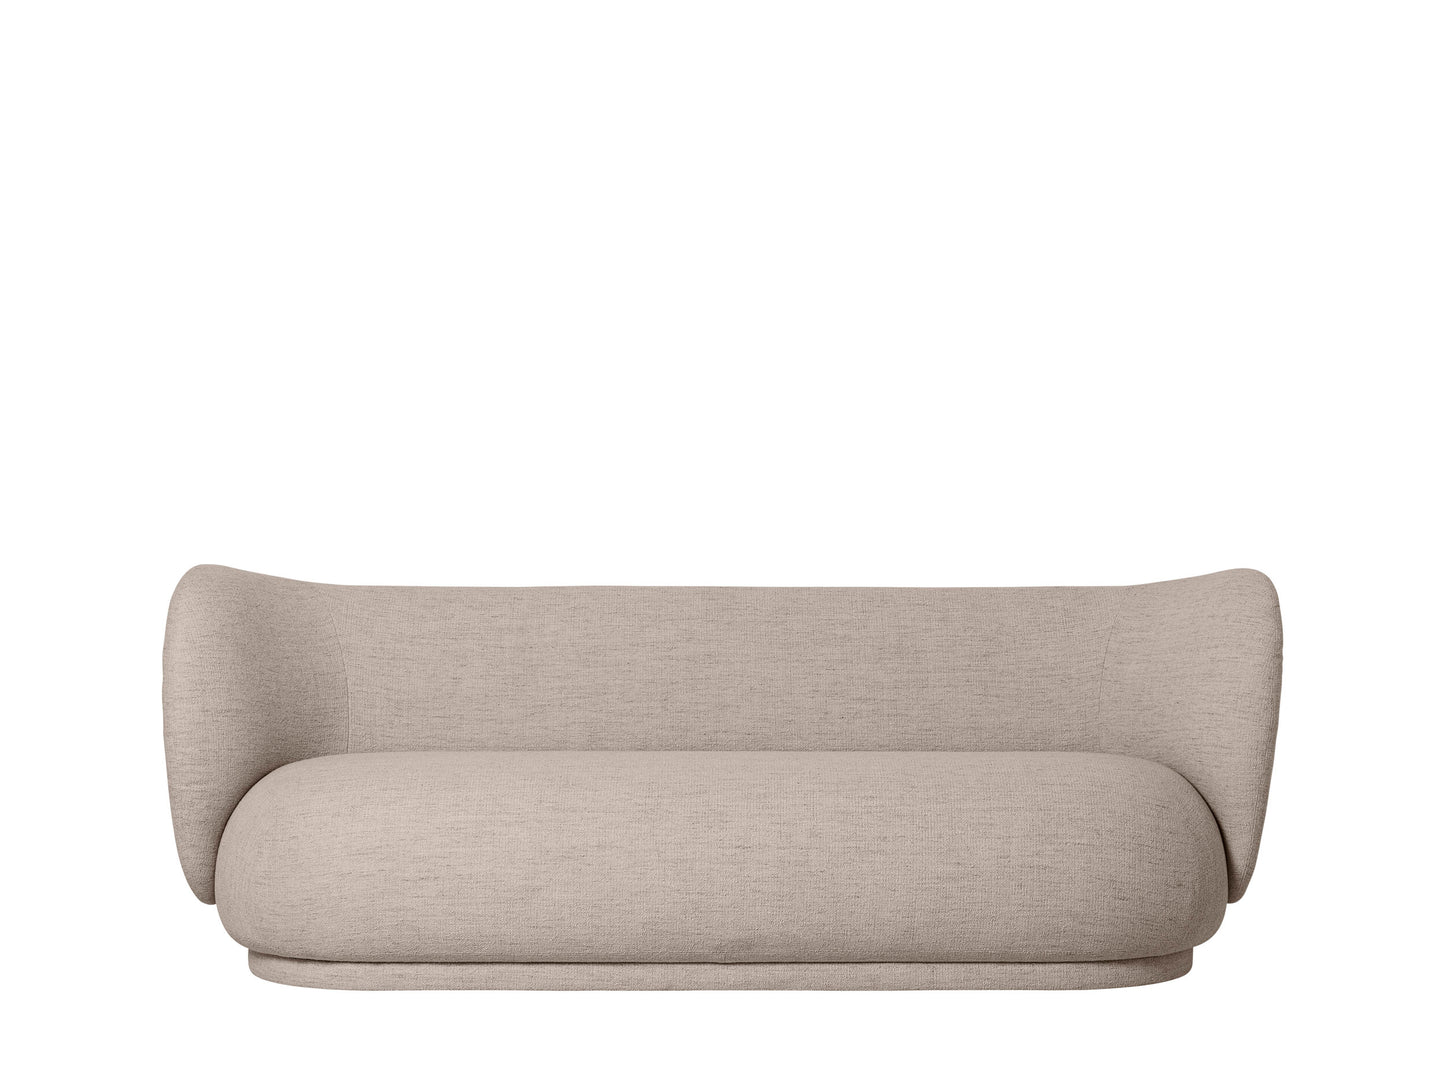 Rico Sofa 3 Seater by ferm LIVING